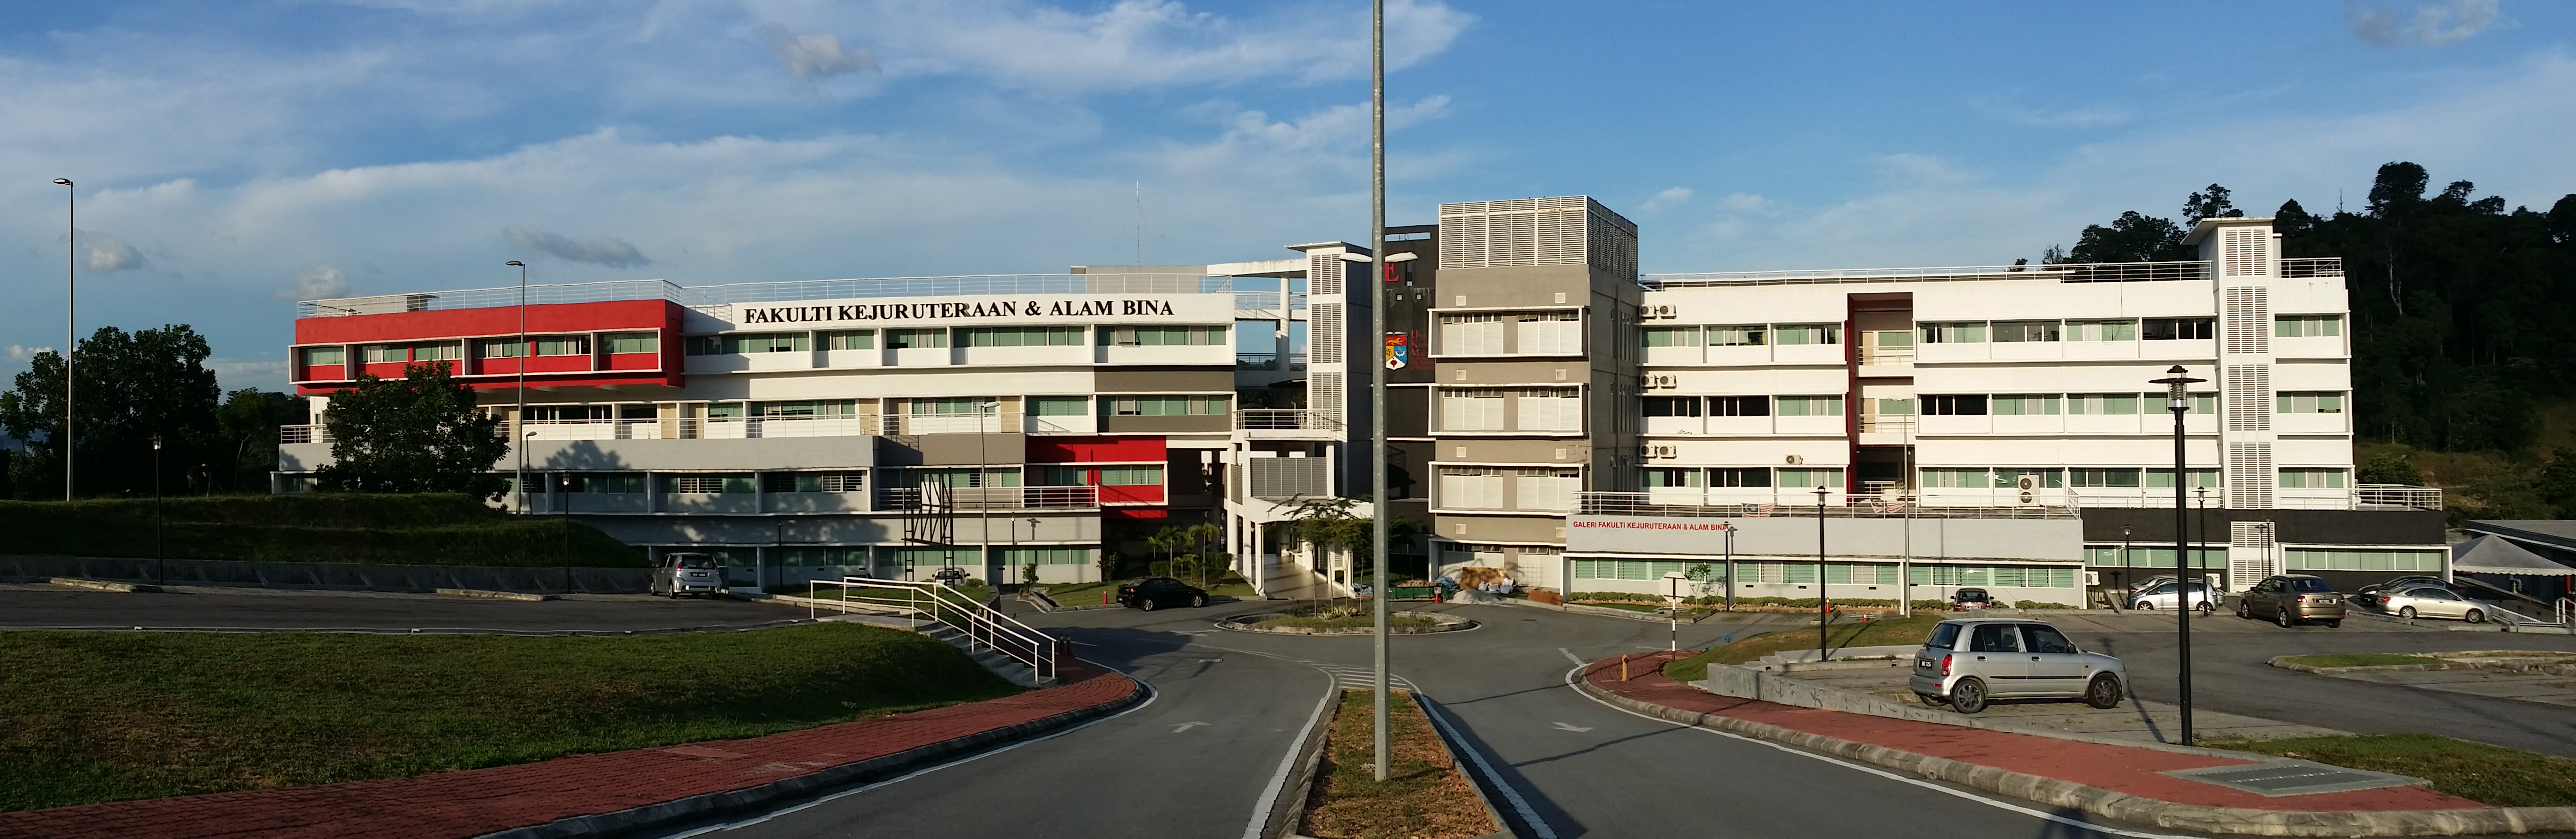 Faculty of Engineering and Built Environment UKM. Source Image: UKM